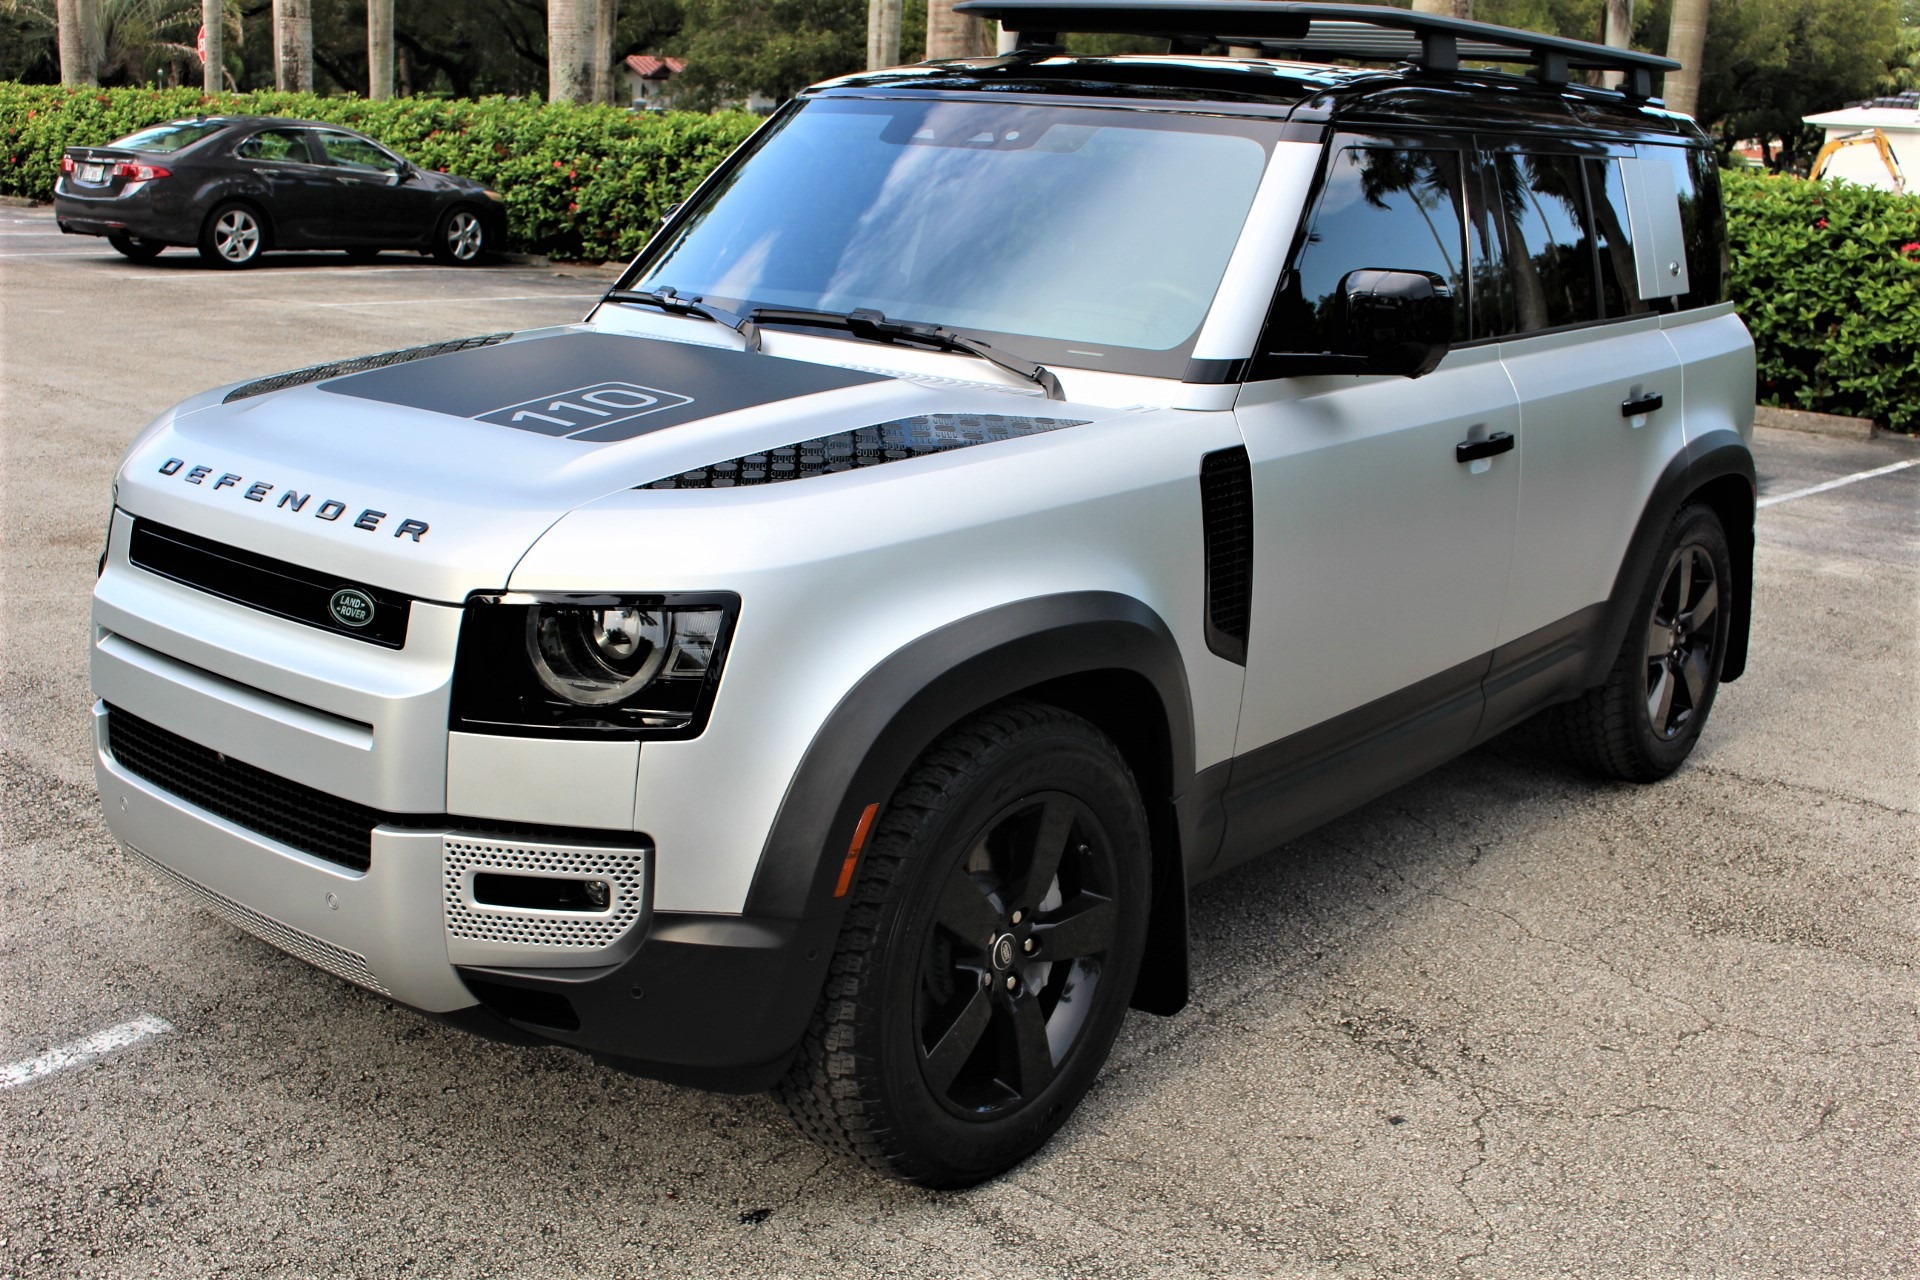 Used 2020 Land Rover Defender 110 HSE for sale Sold at The Gables Sports Cars in Miami FL 33146 3